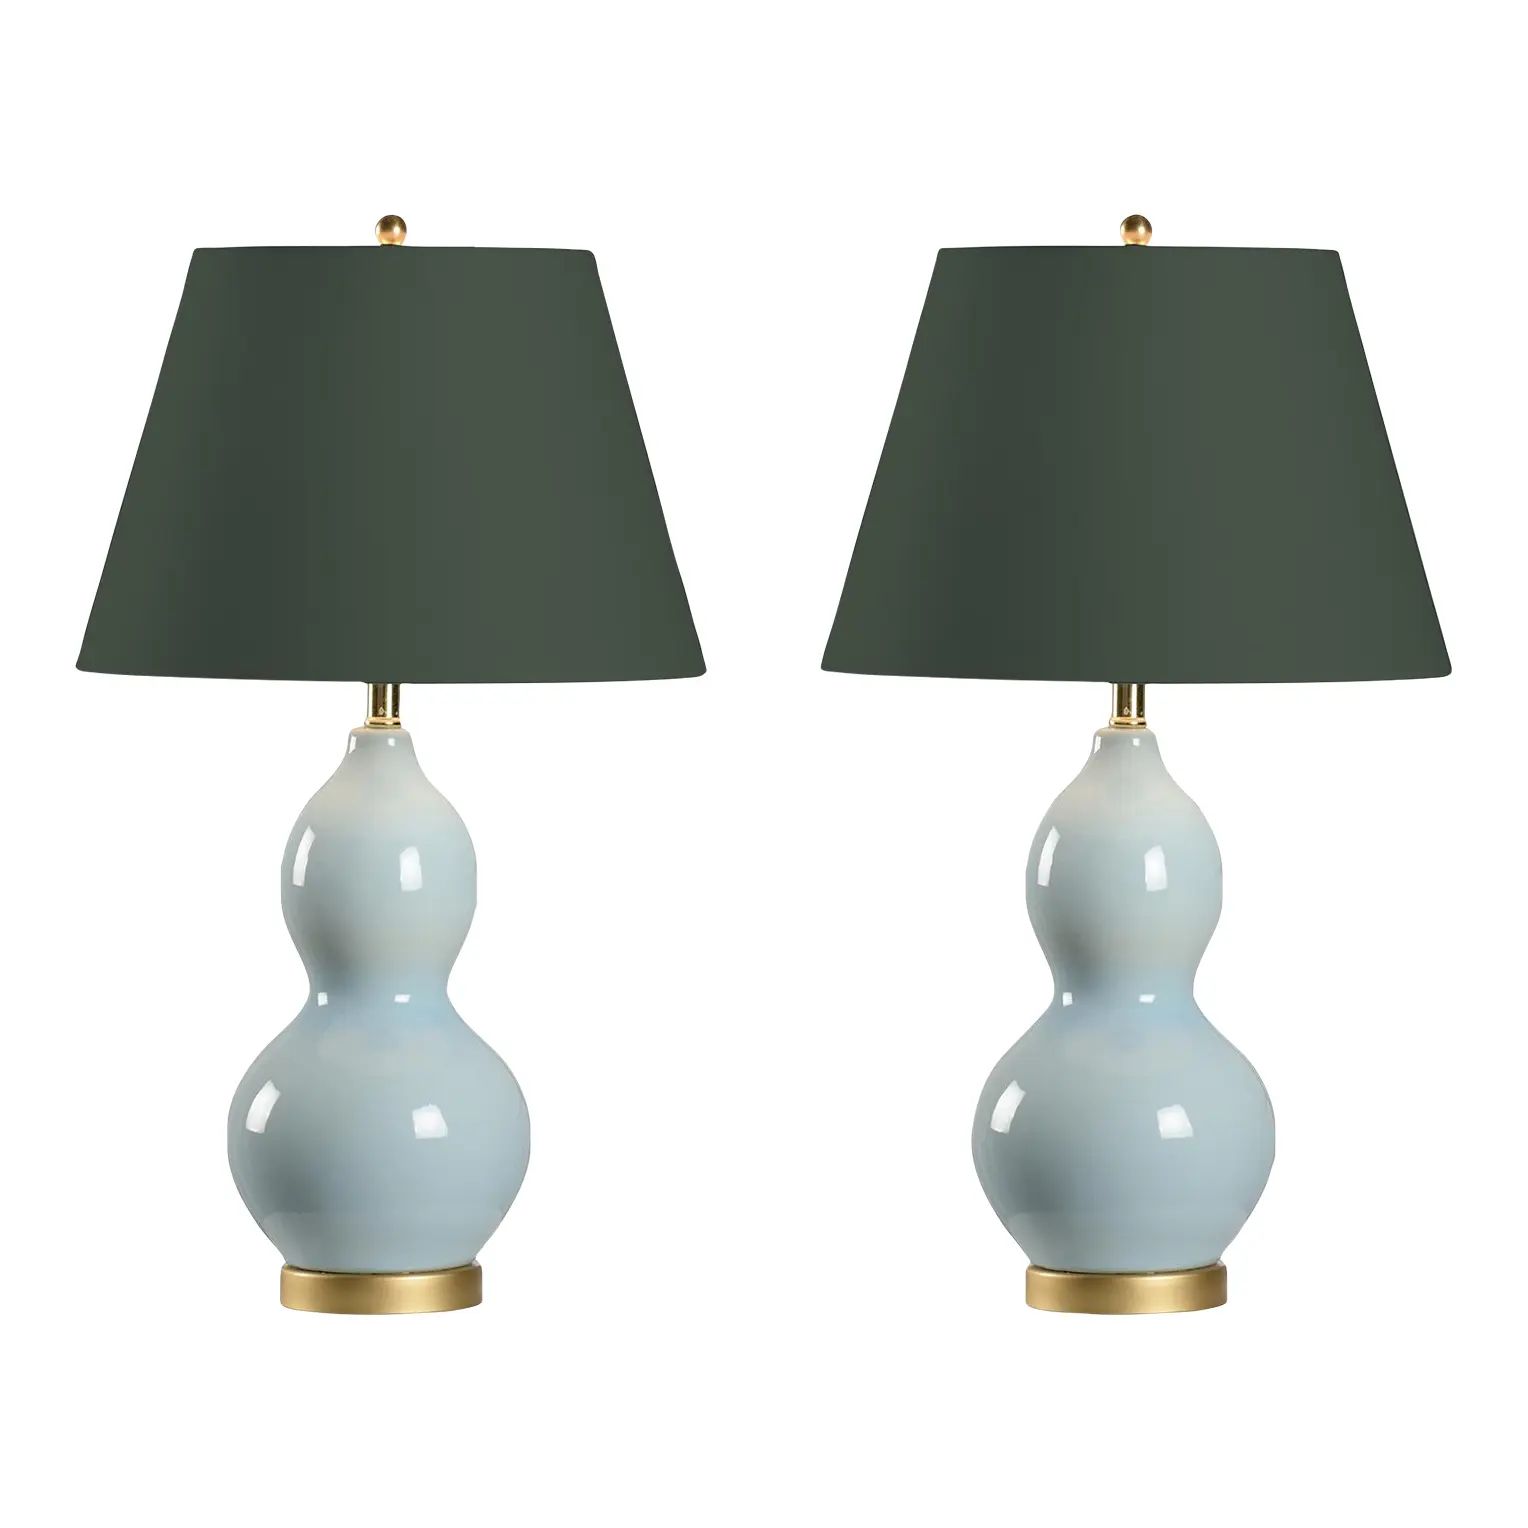 Casa Cosima Double Gourd Table Lamps, Light Blue Base with Dakota Shadow Lampshade - A Pair | Chairish